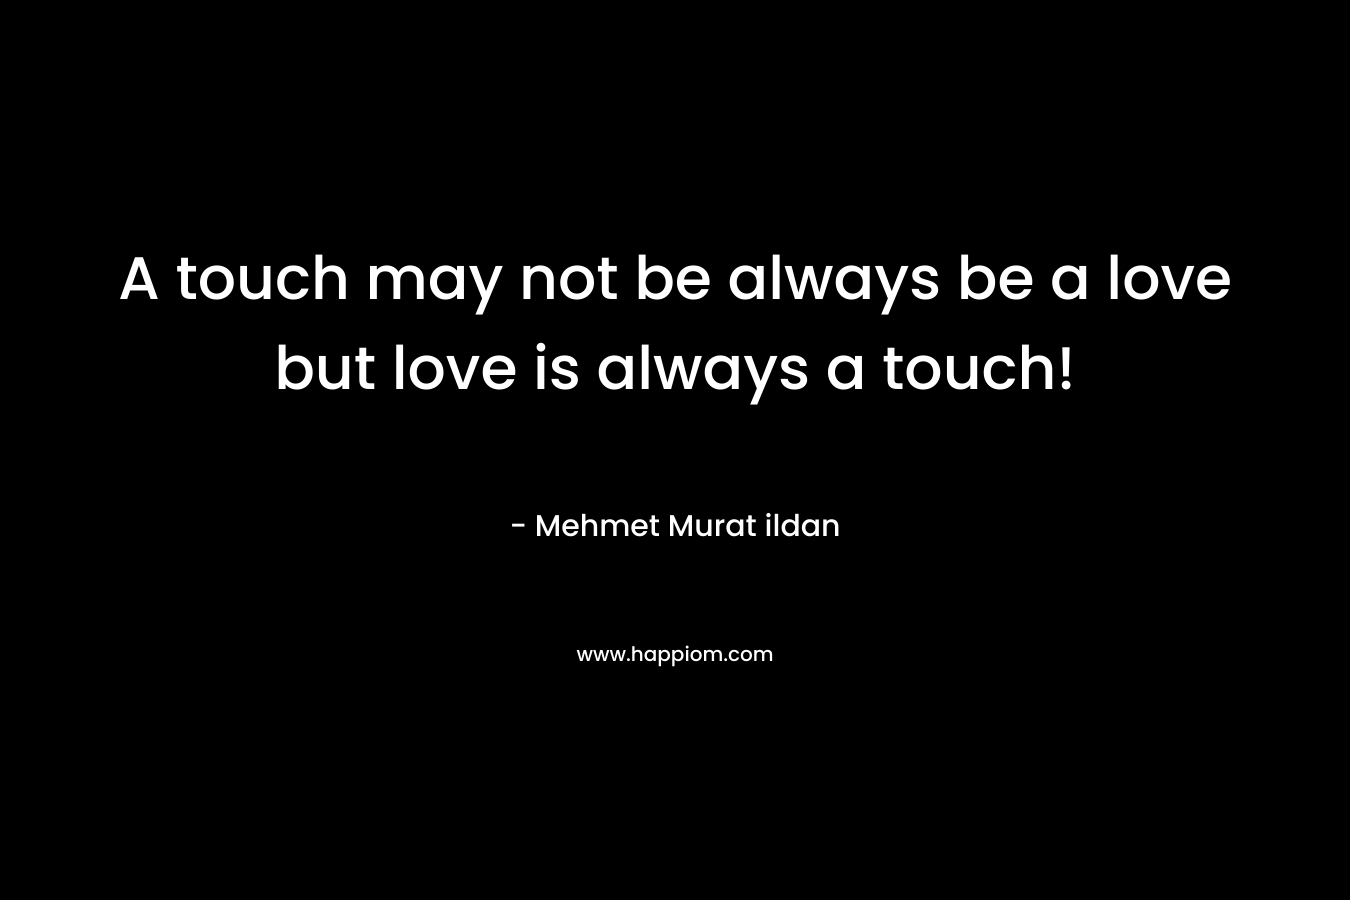 A touch may not be always be a love but love is always a touch!